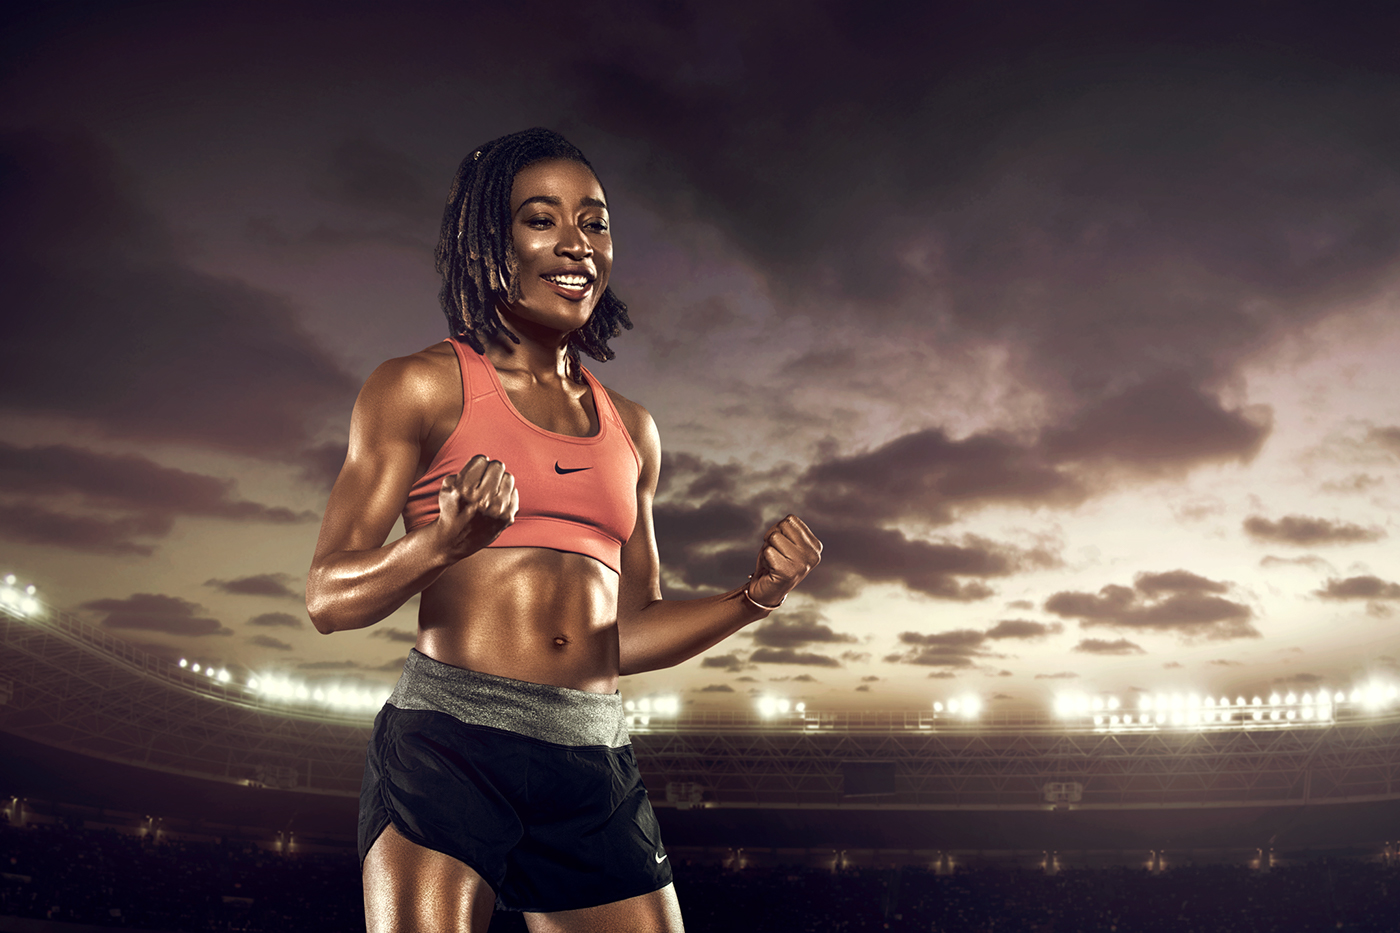 coloring colorgrading visual sports photomanipulation compositing campaign